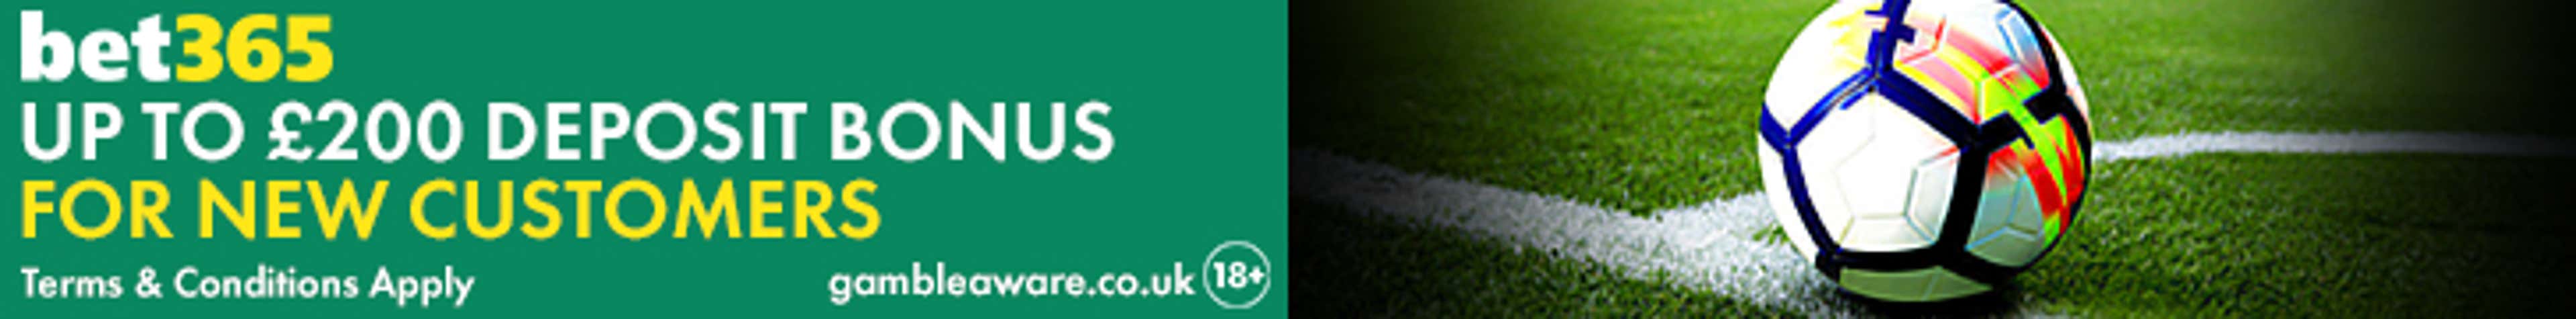 bet365 new account offer footer UK